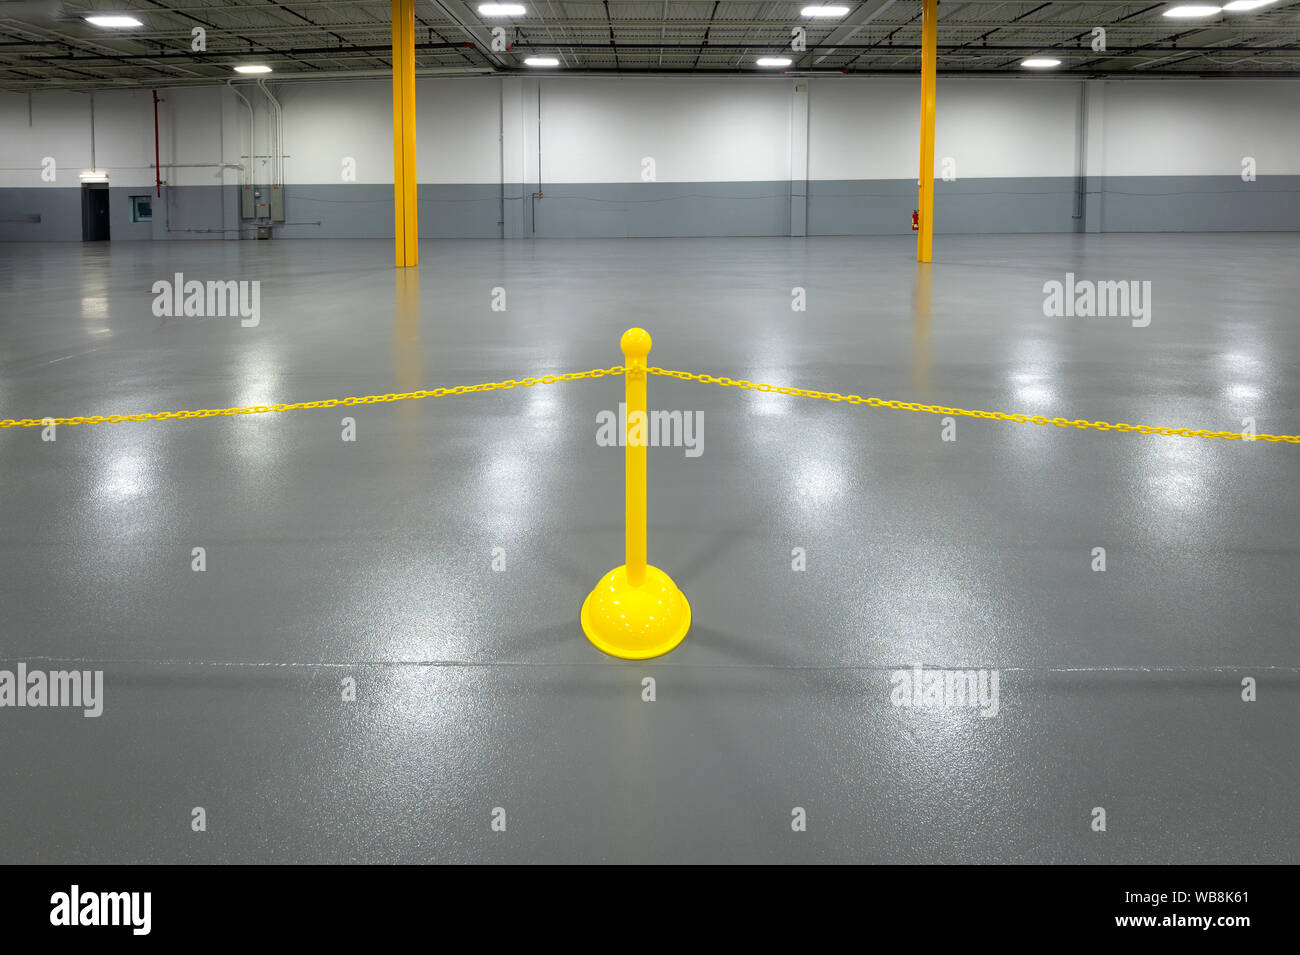 Yellow plastic stanchion in warehouse Stock Photo